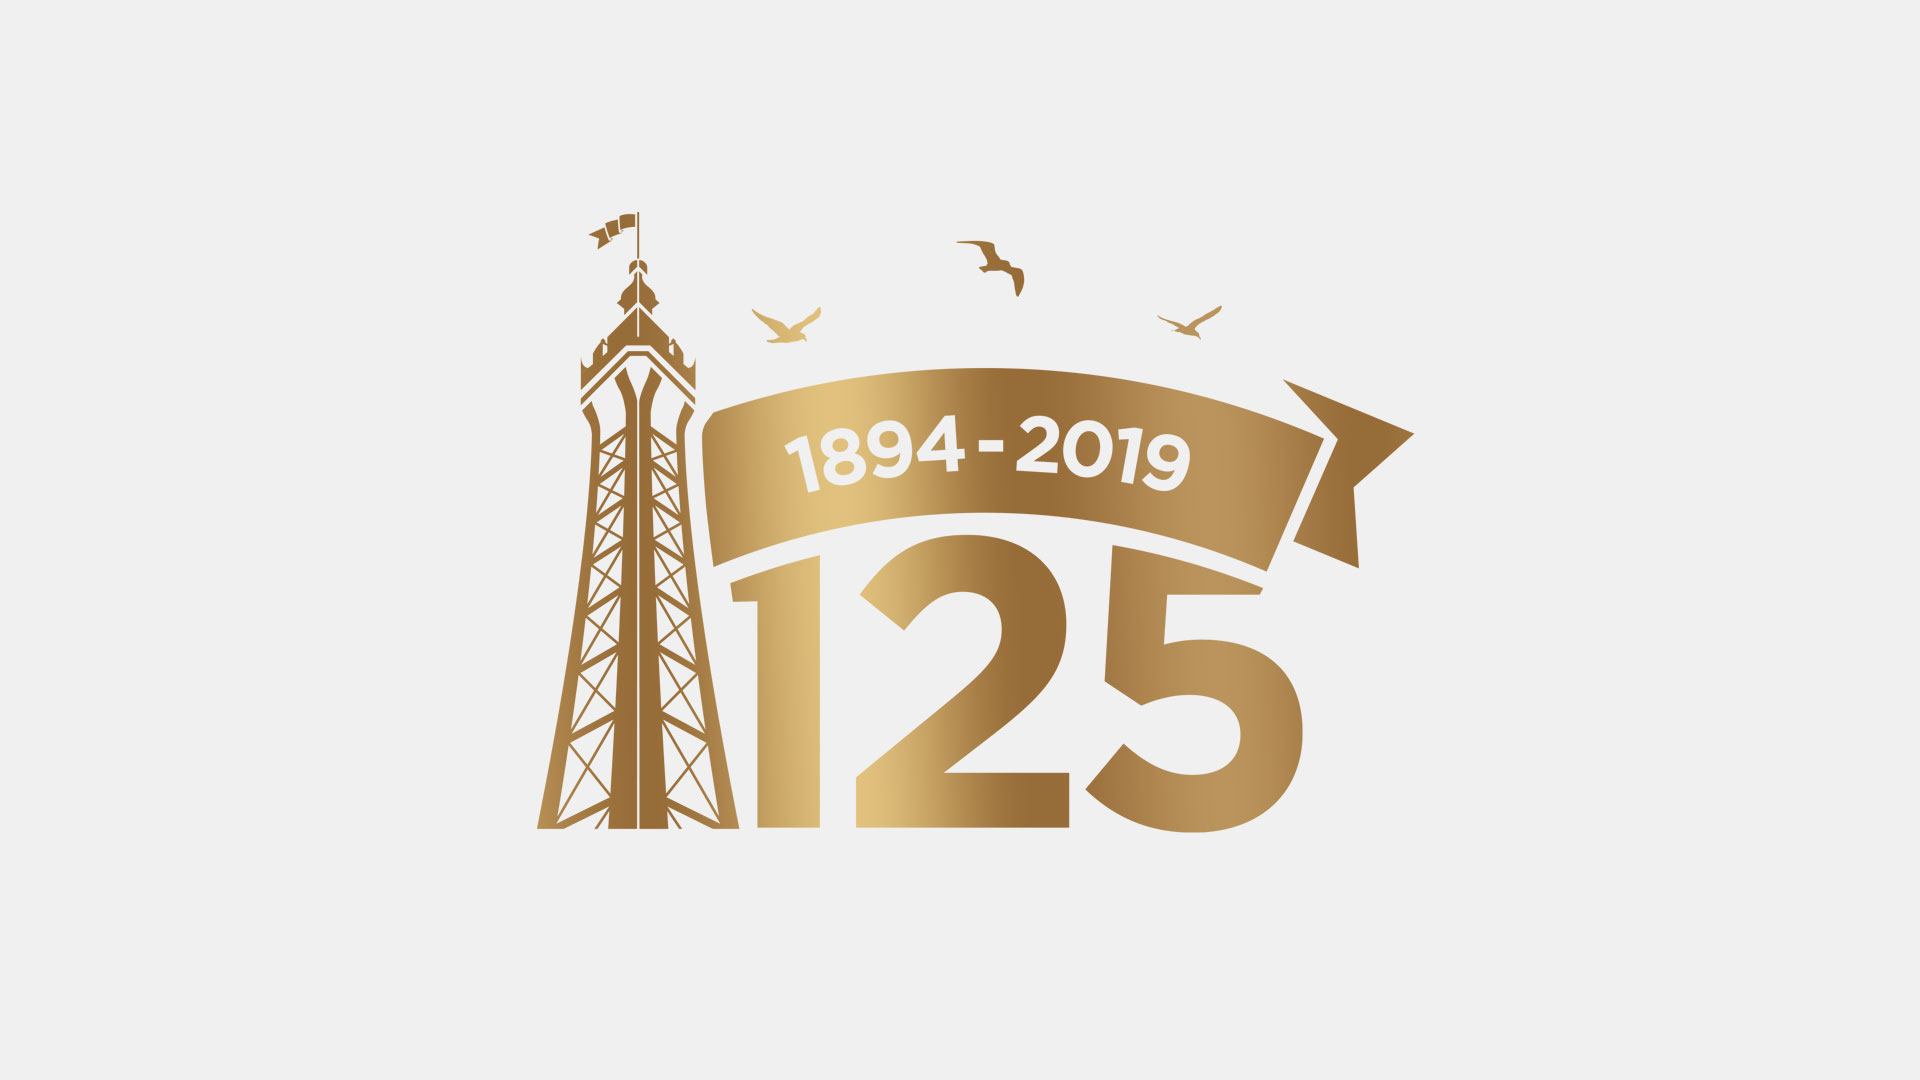 Celebrating 125 years of the Blackpool Tower